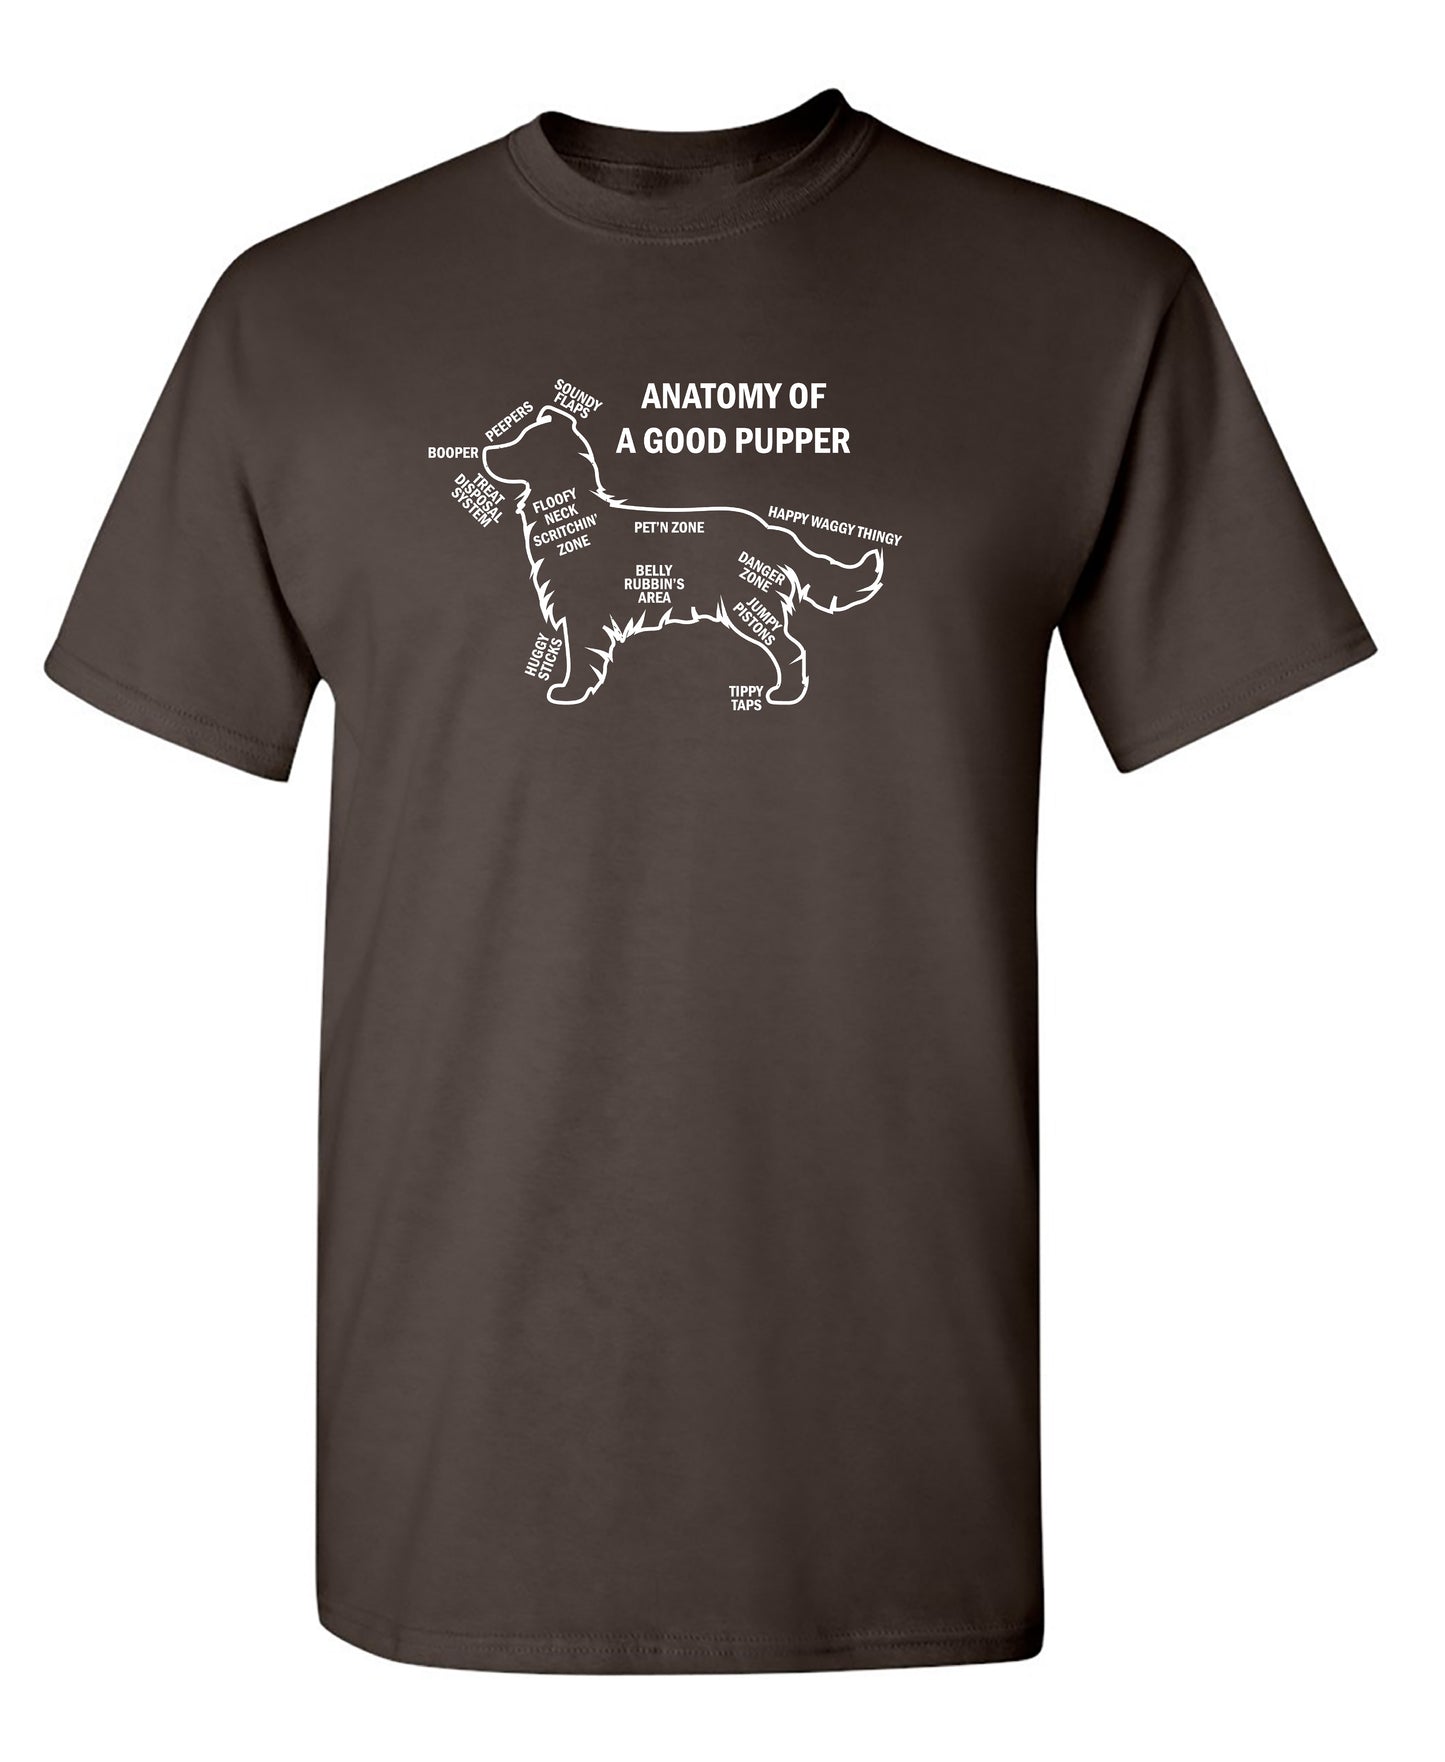 Anatomy Of A Good Pupper - Funny T Shirts & Graphic Tees